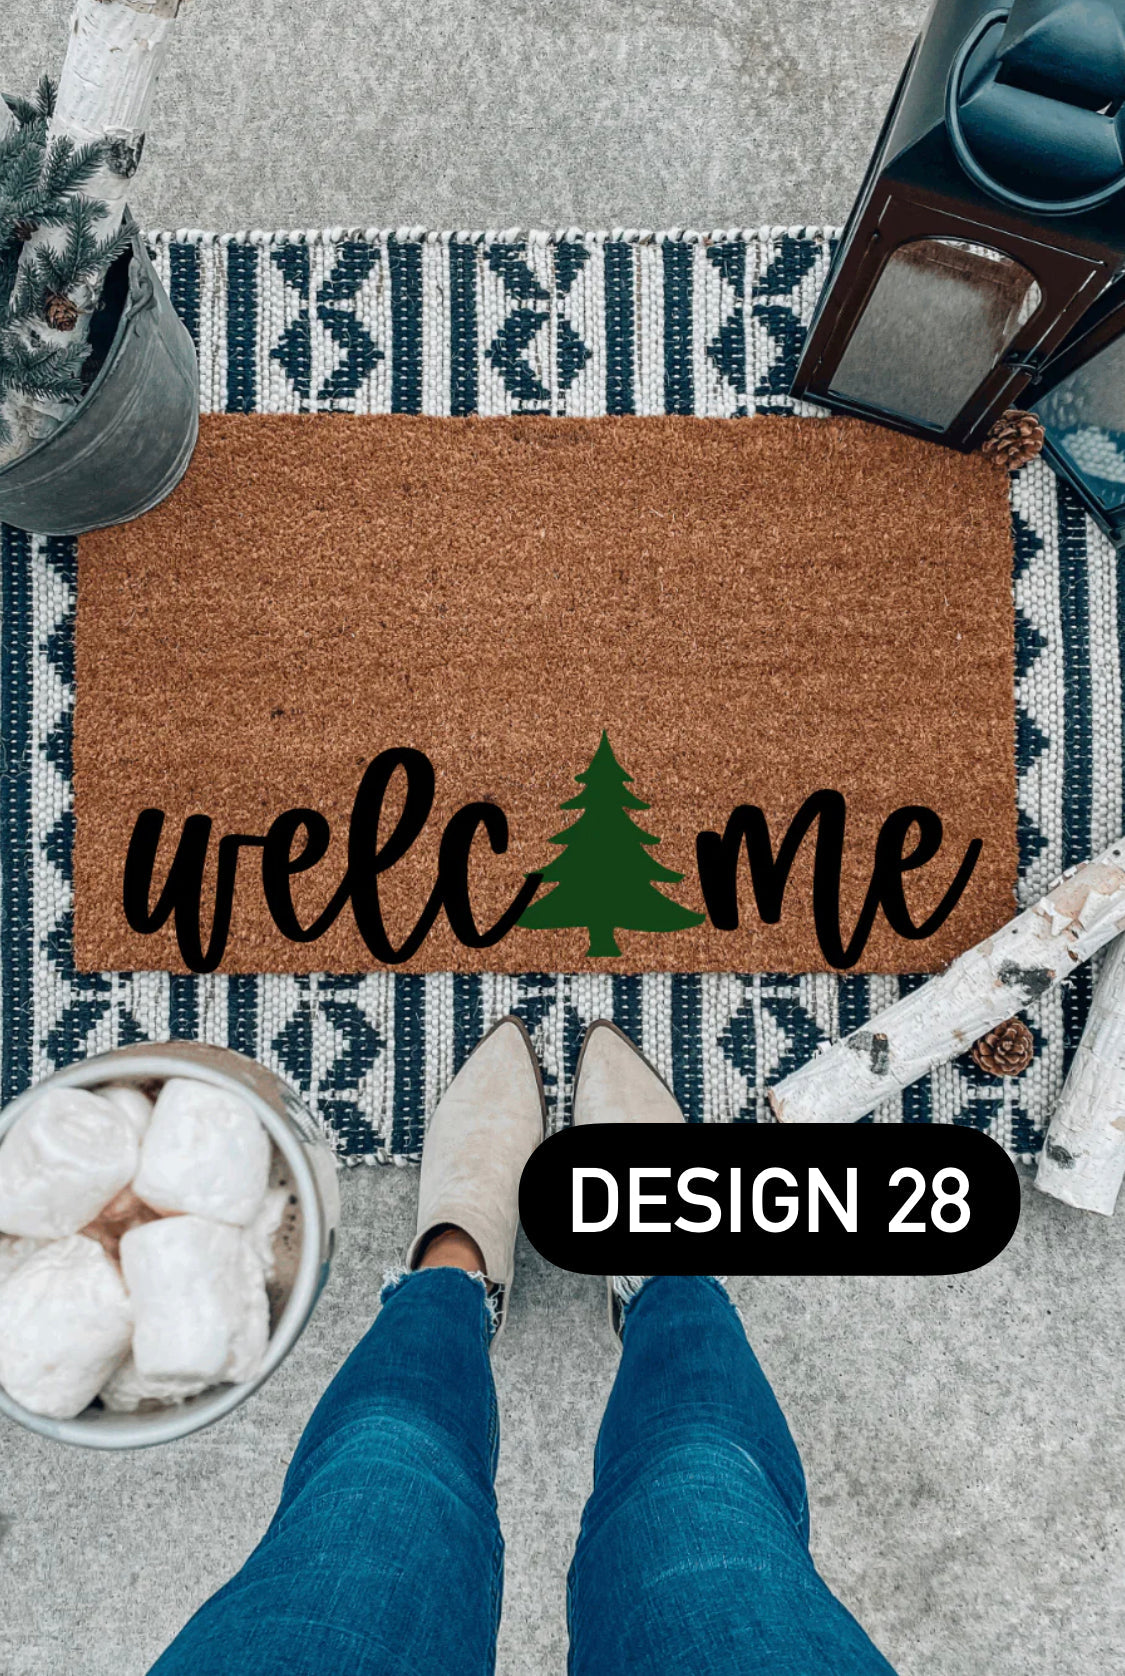 Doormat Painting Class | October 19 | Collective Boutique